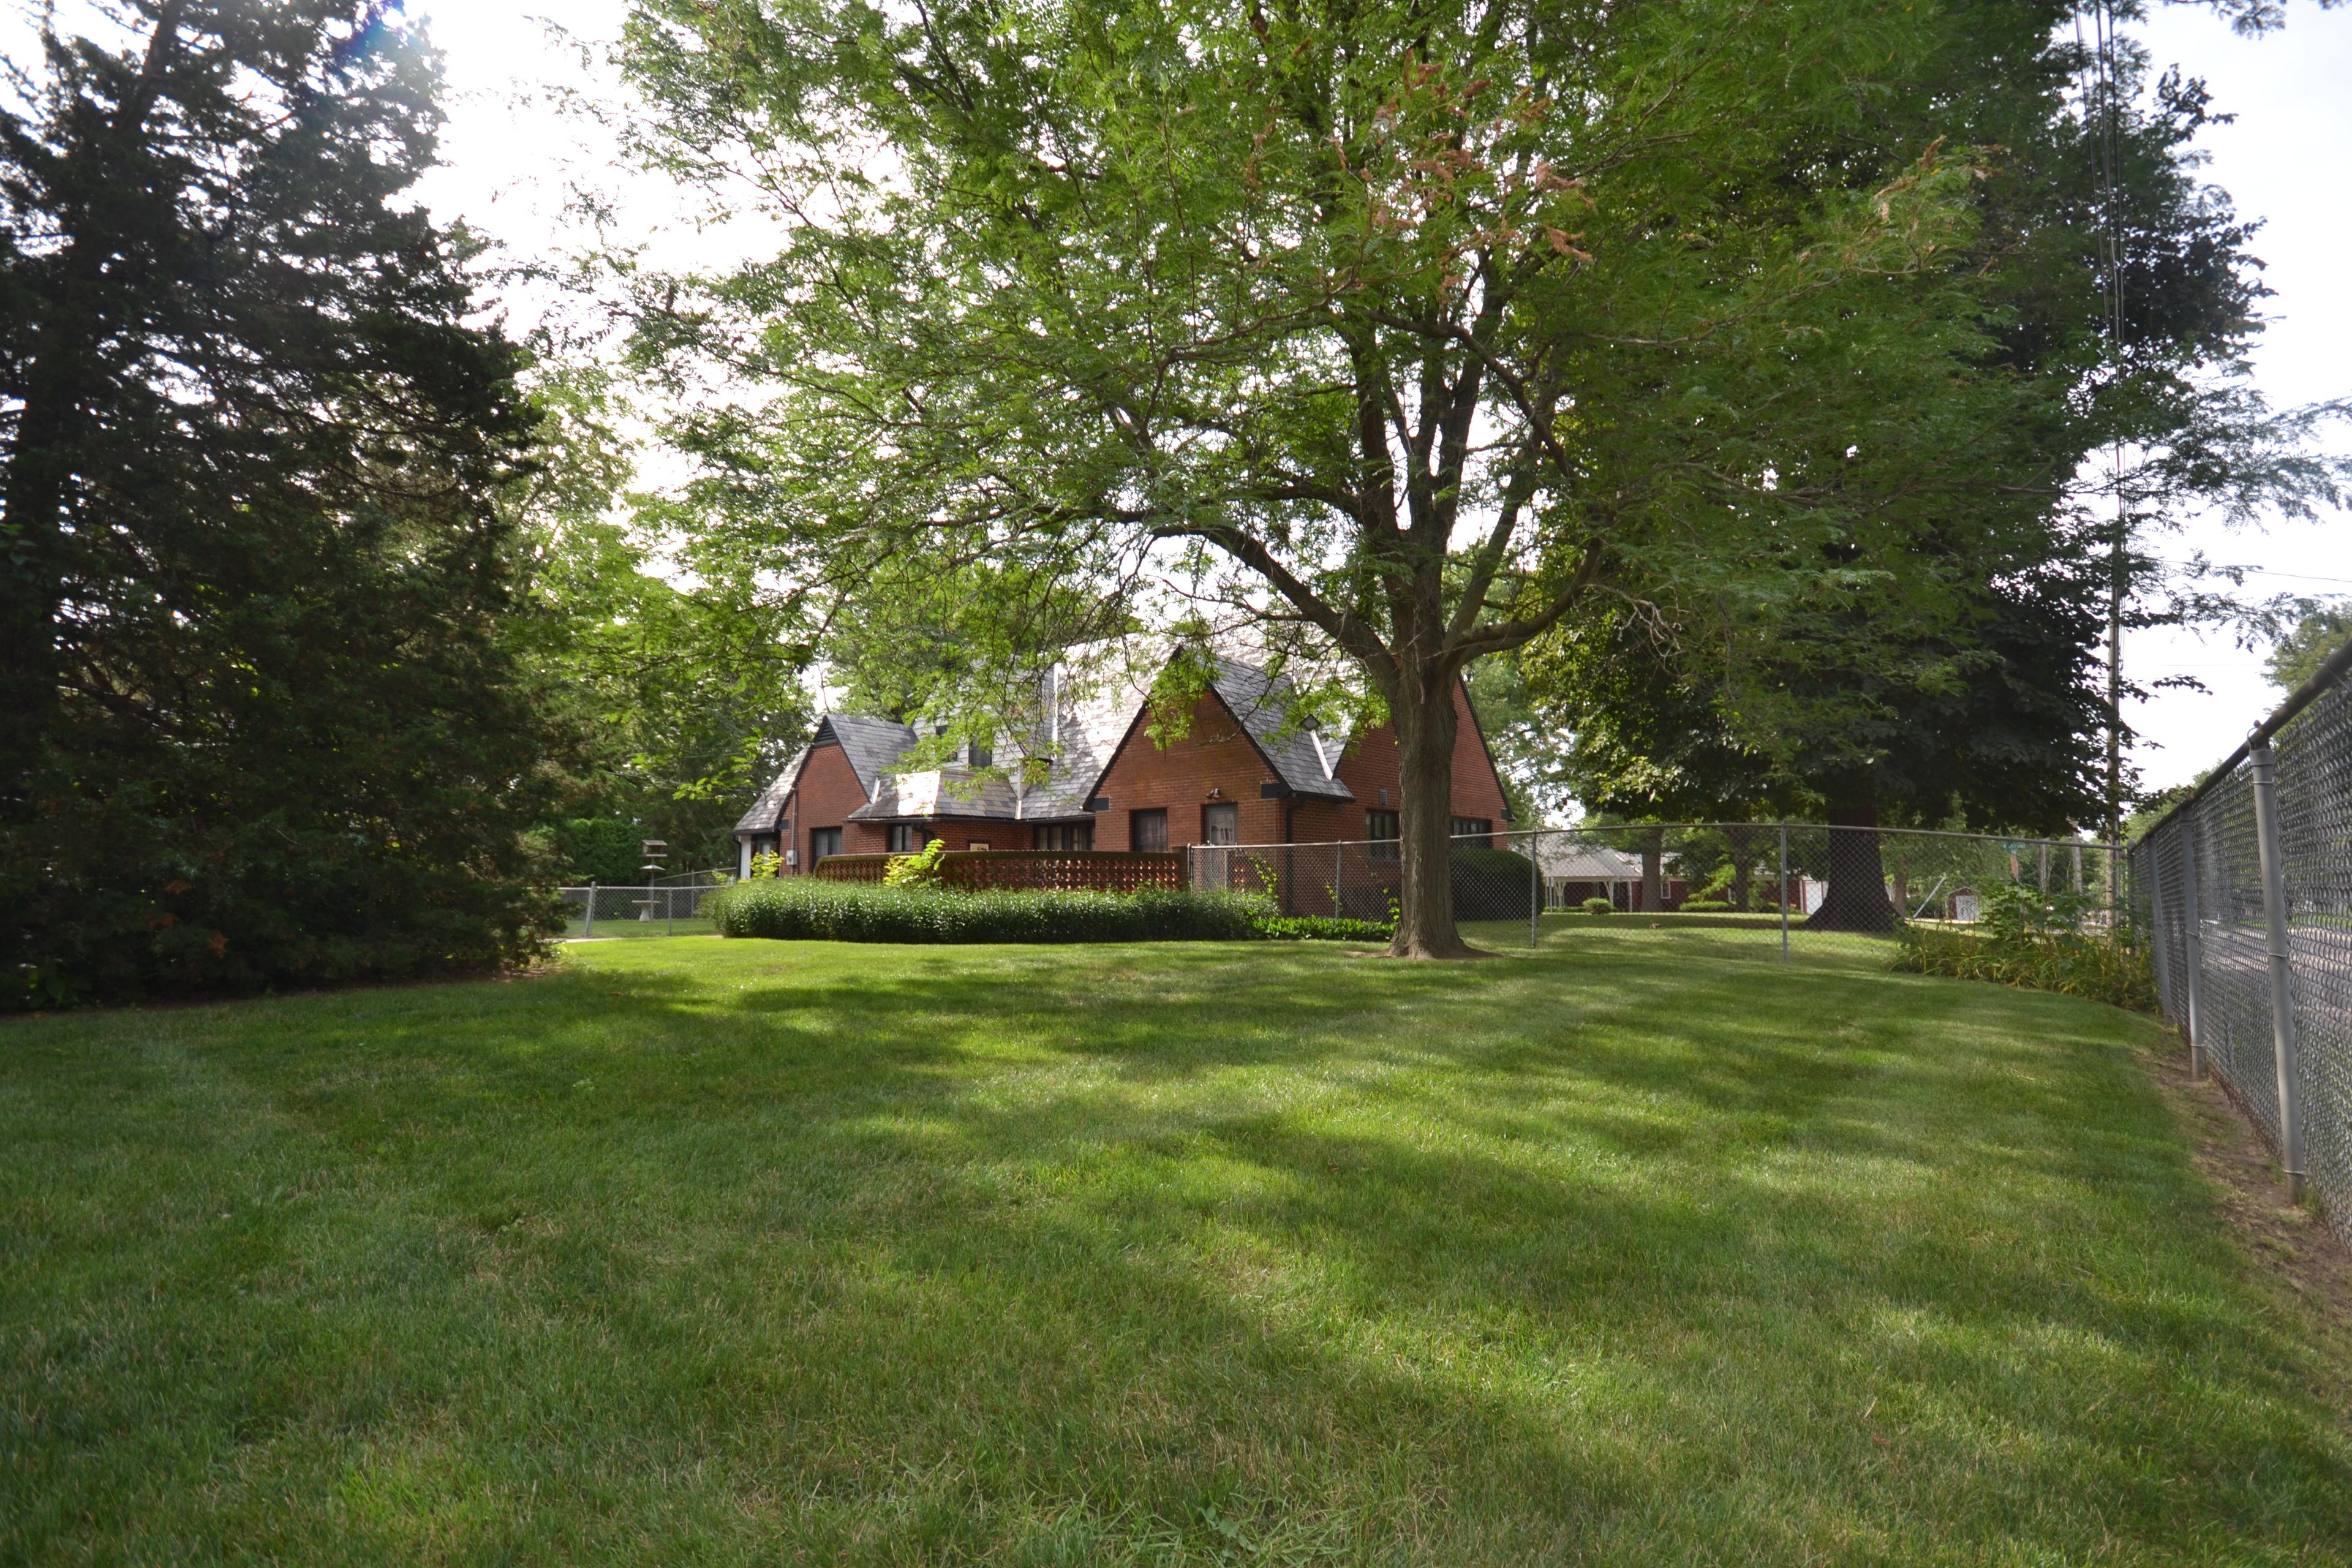 4 To 5 Bedroom Home On .34 Acres +-